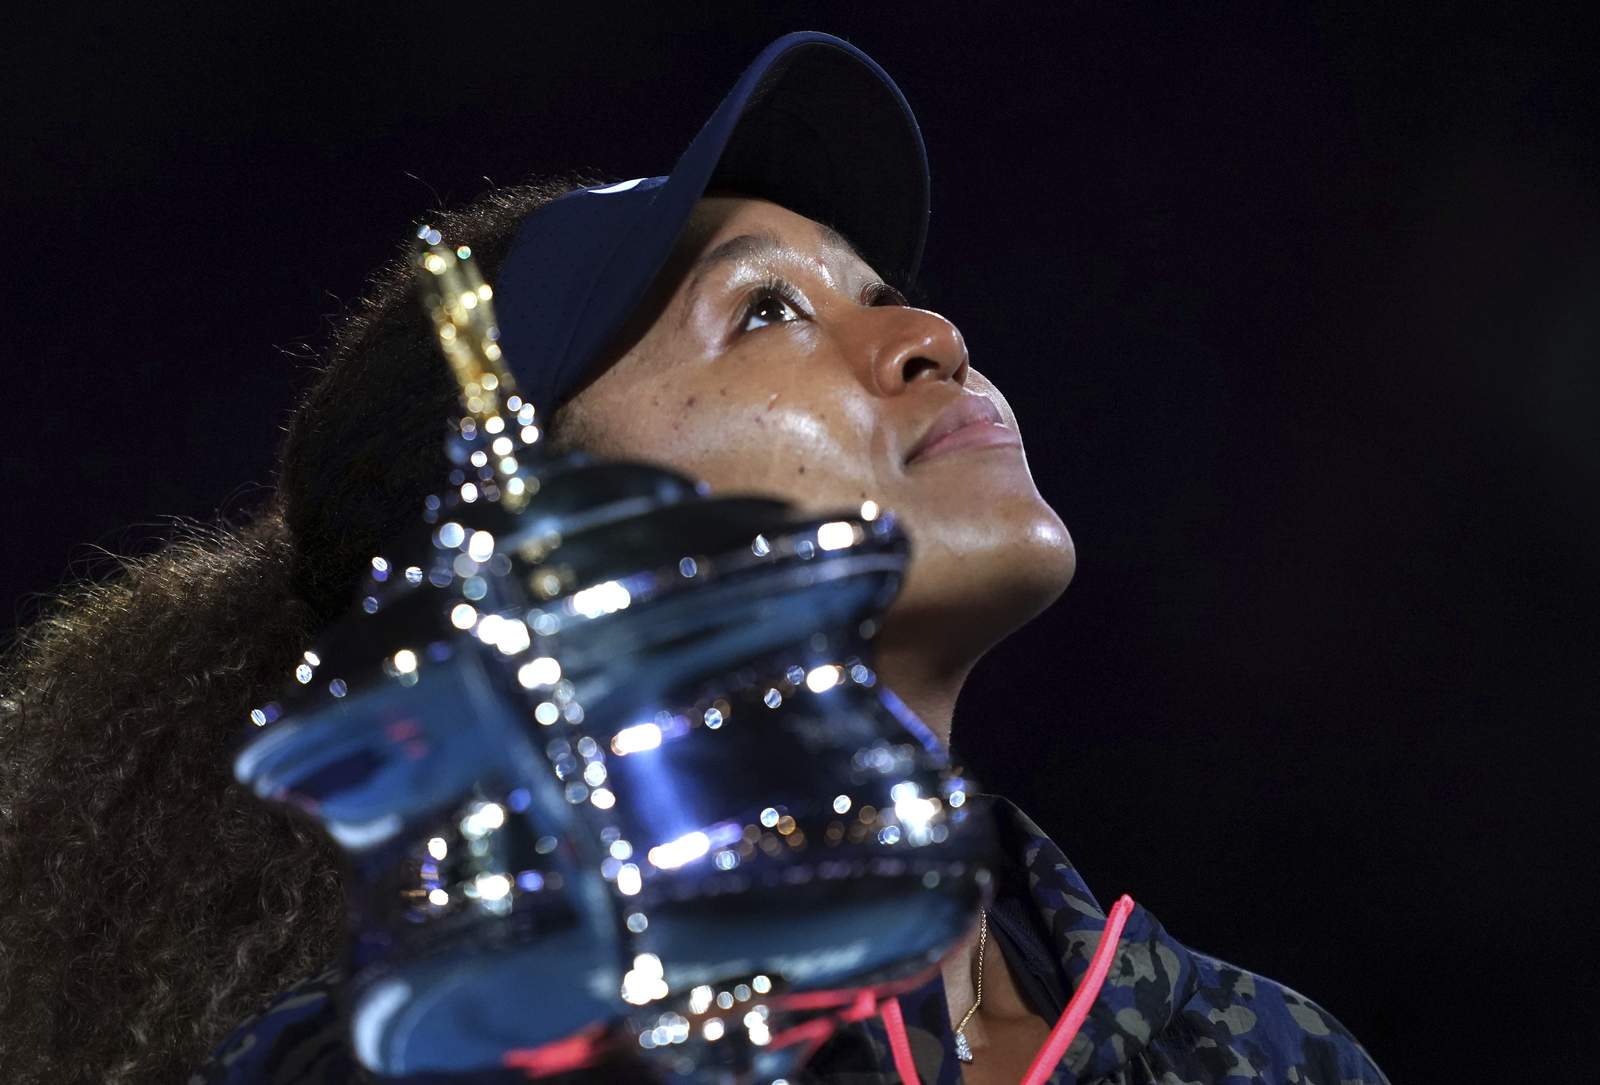 4 for 4: Osaka wins Australian, stays perfect in Slam finals